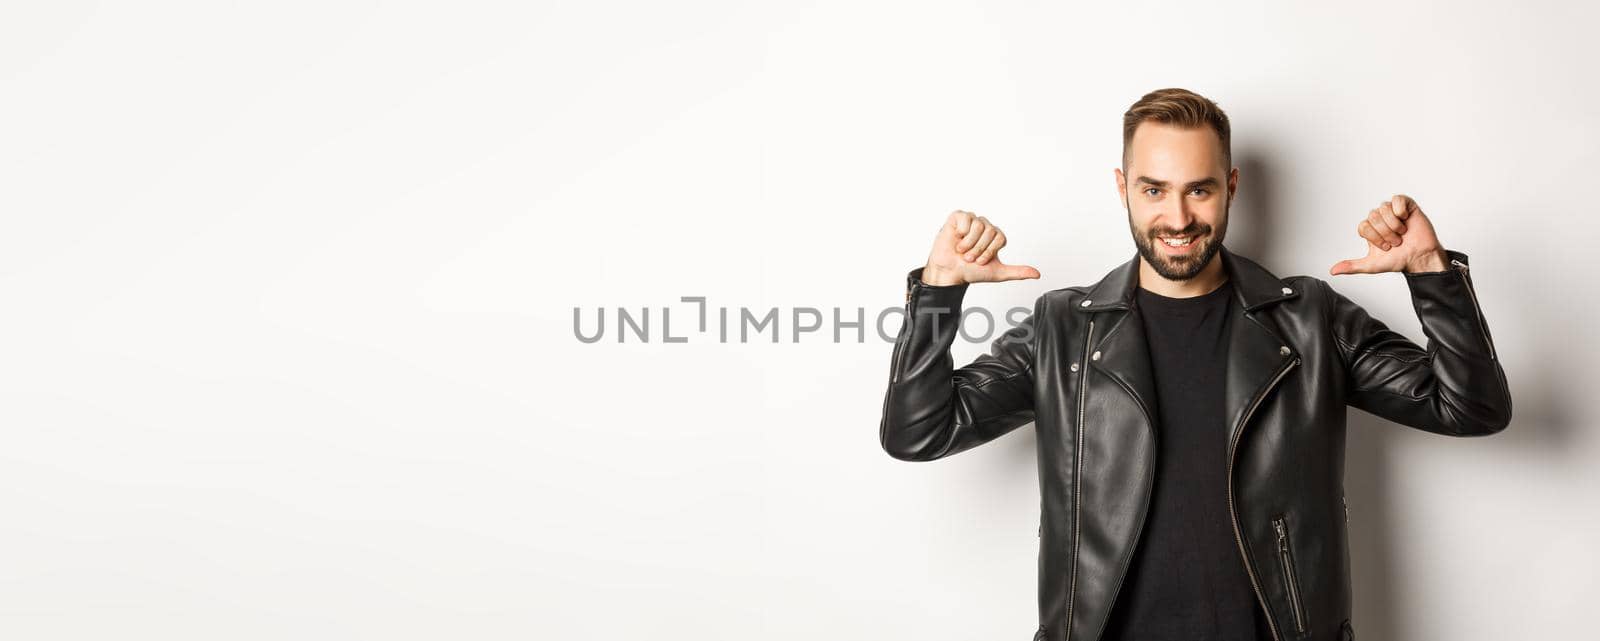 Confident handsome man wearing black leather jacket, pointing at himself and smiling self-assured, standing against white background.